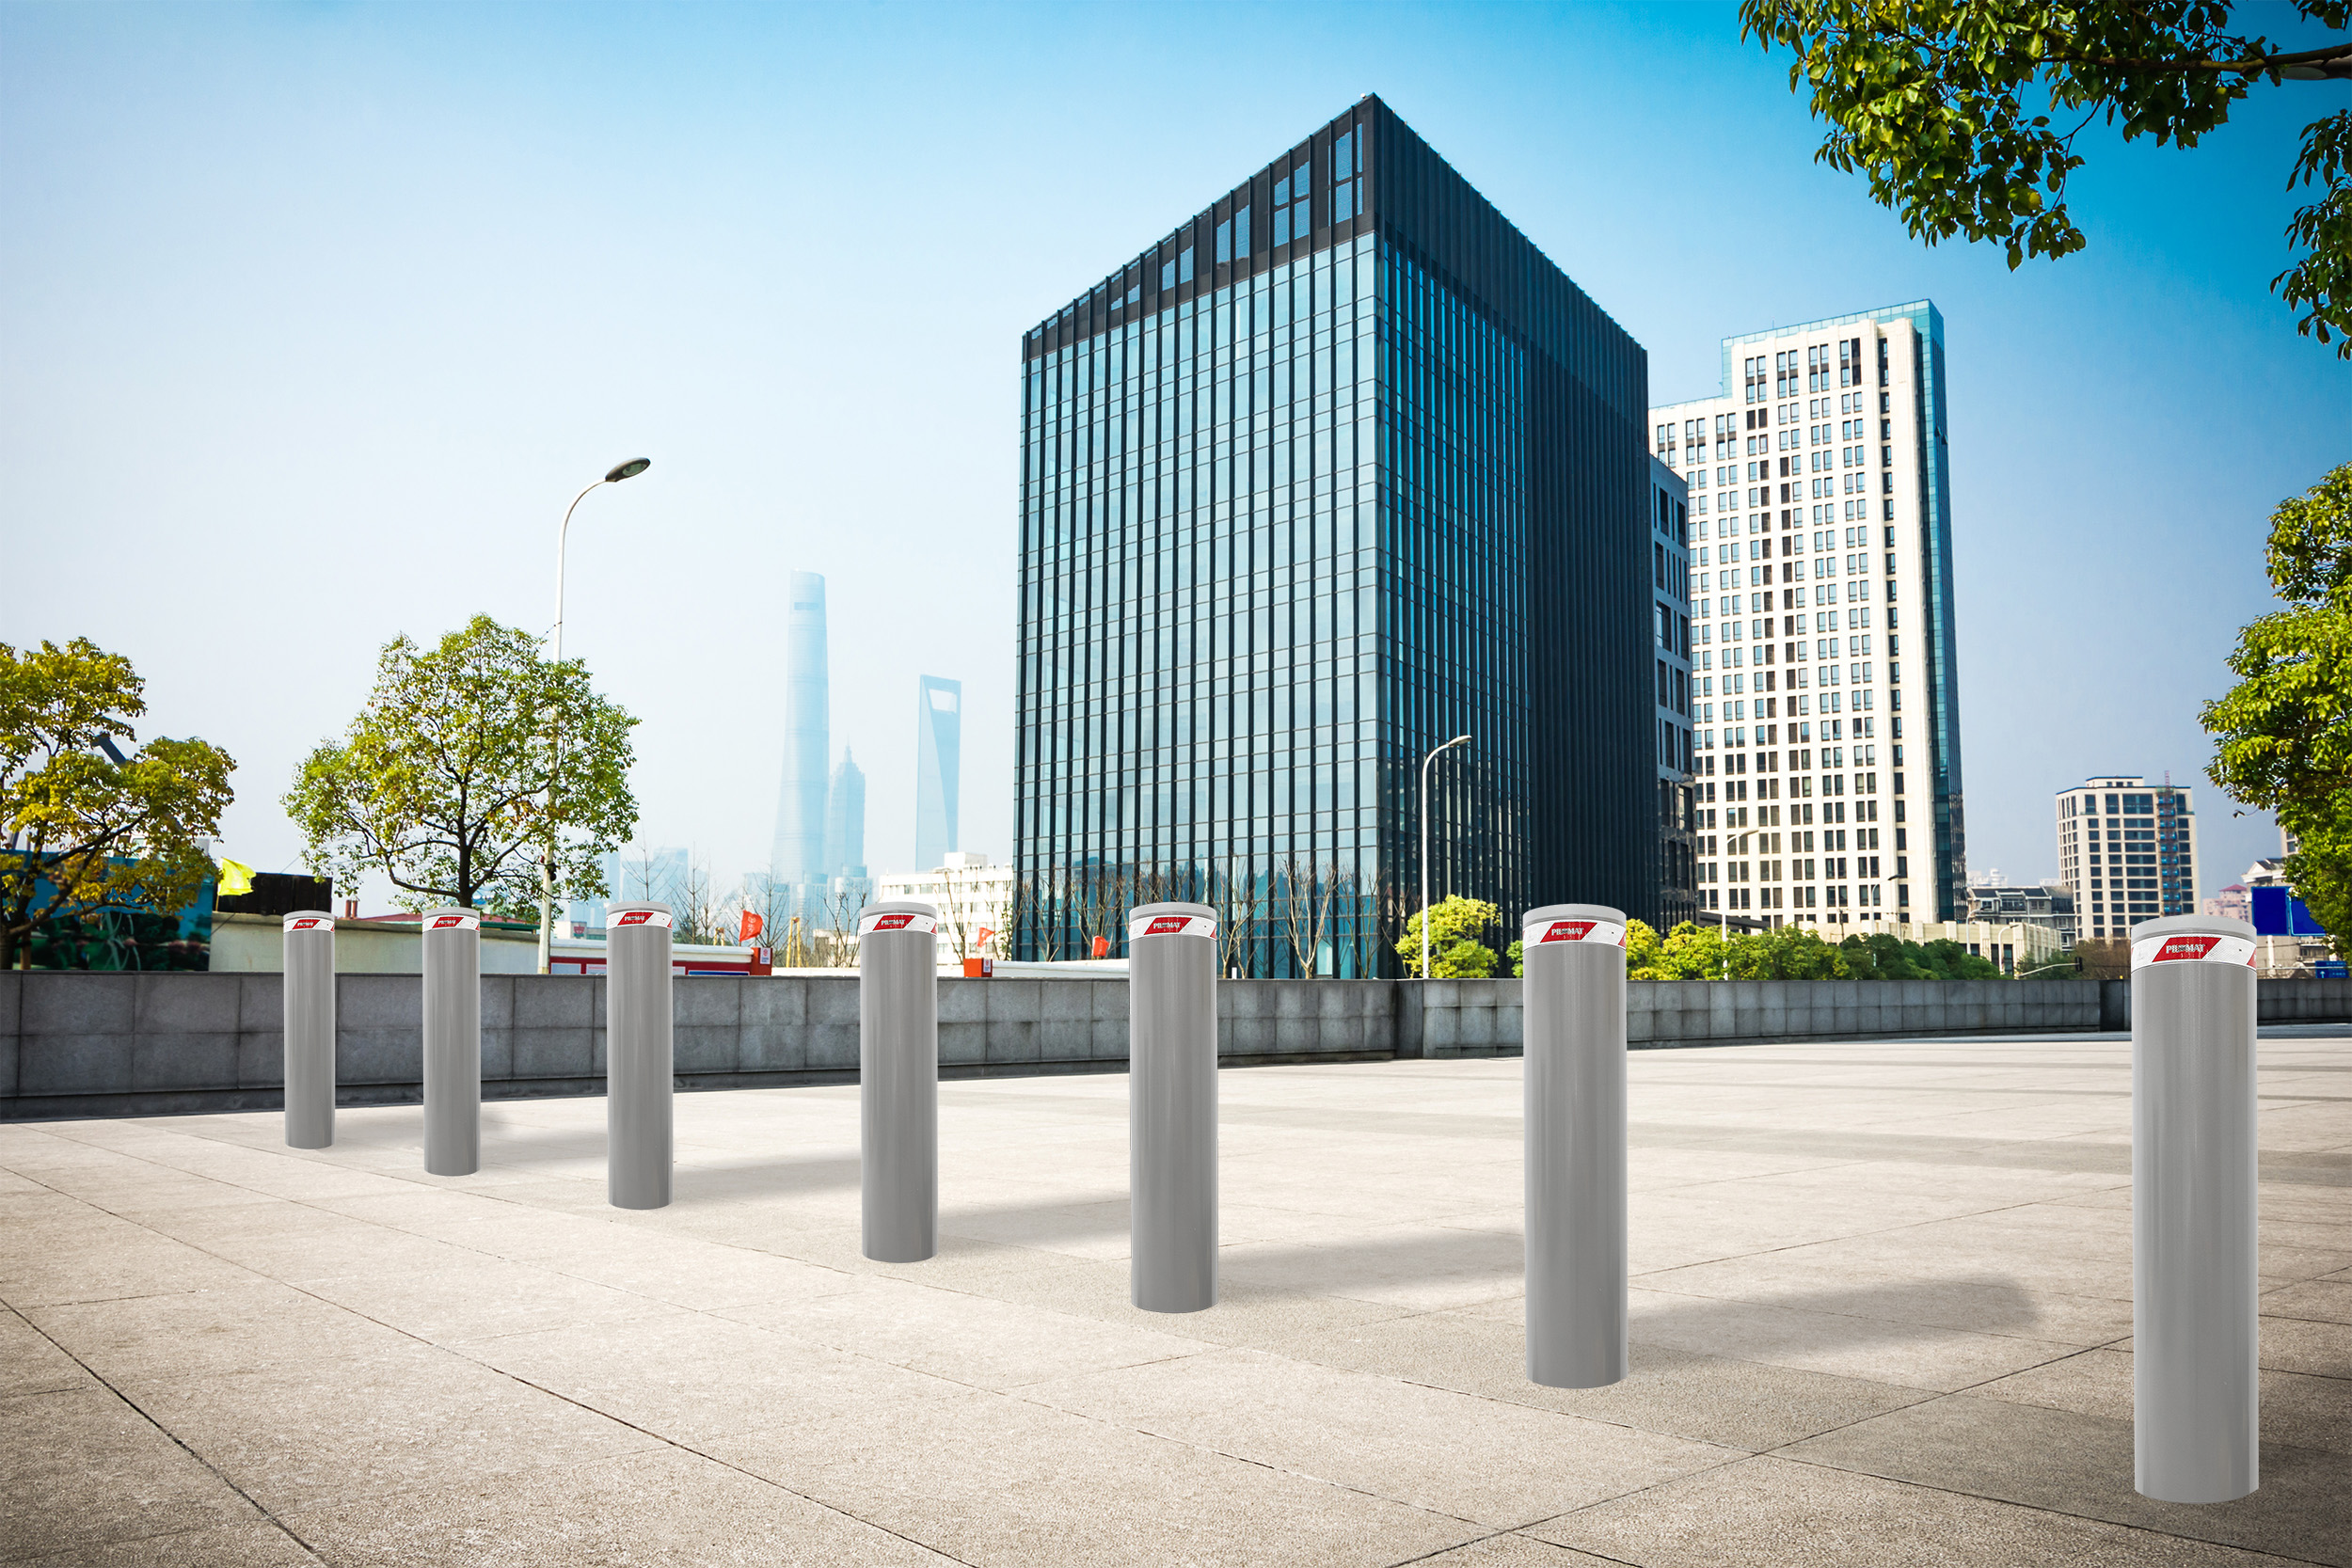 Image of several high security fixed bollards in a row, installed in the city center for protecting a pedestrian area